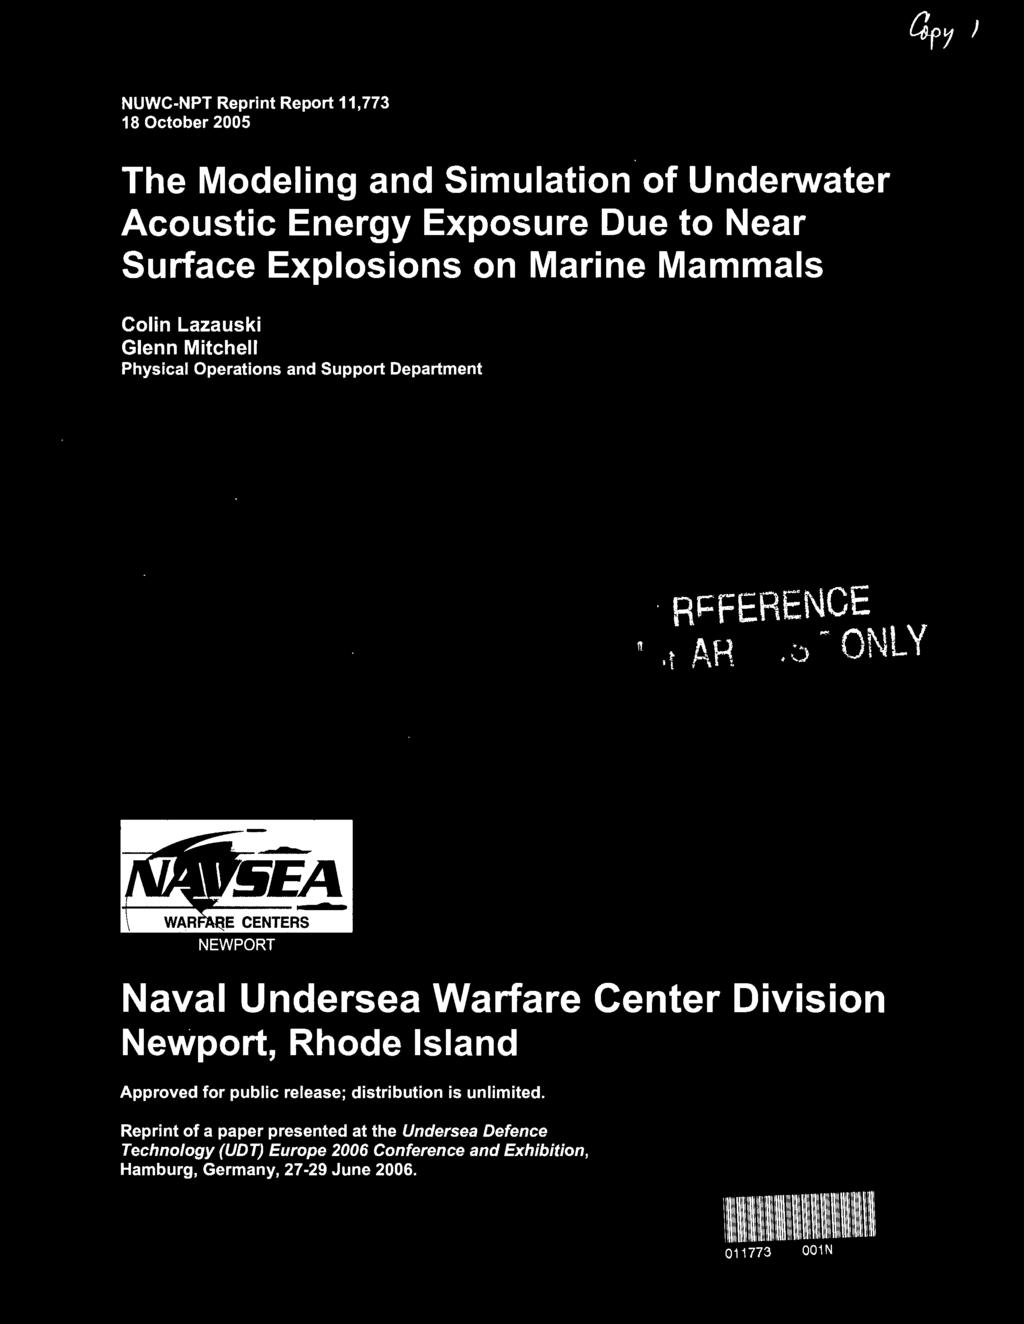 - Jl NEWPORT Naval Undersea Warfare Center Division Newport, Rhode Island Approved for public release; distribution is unlimited.